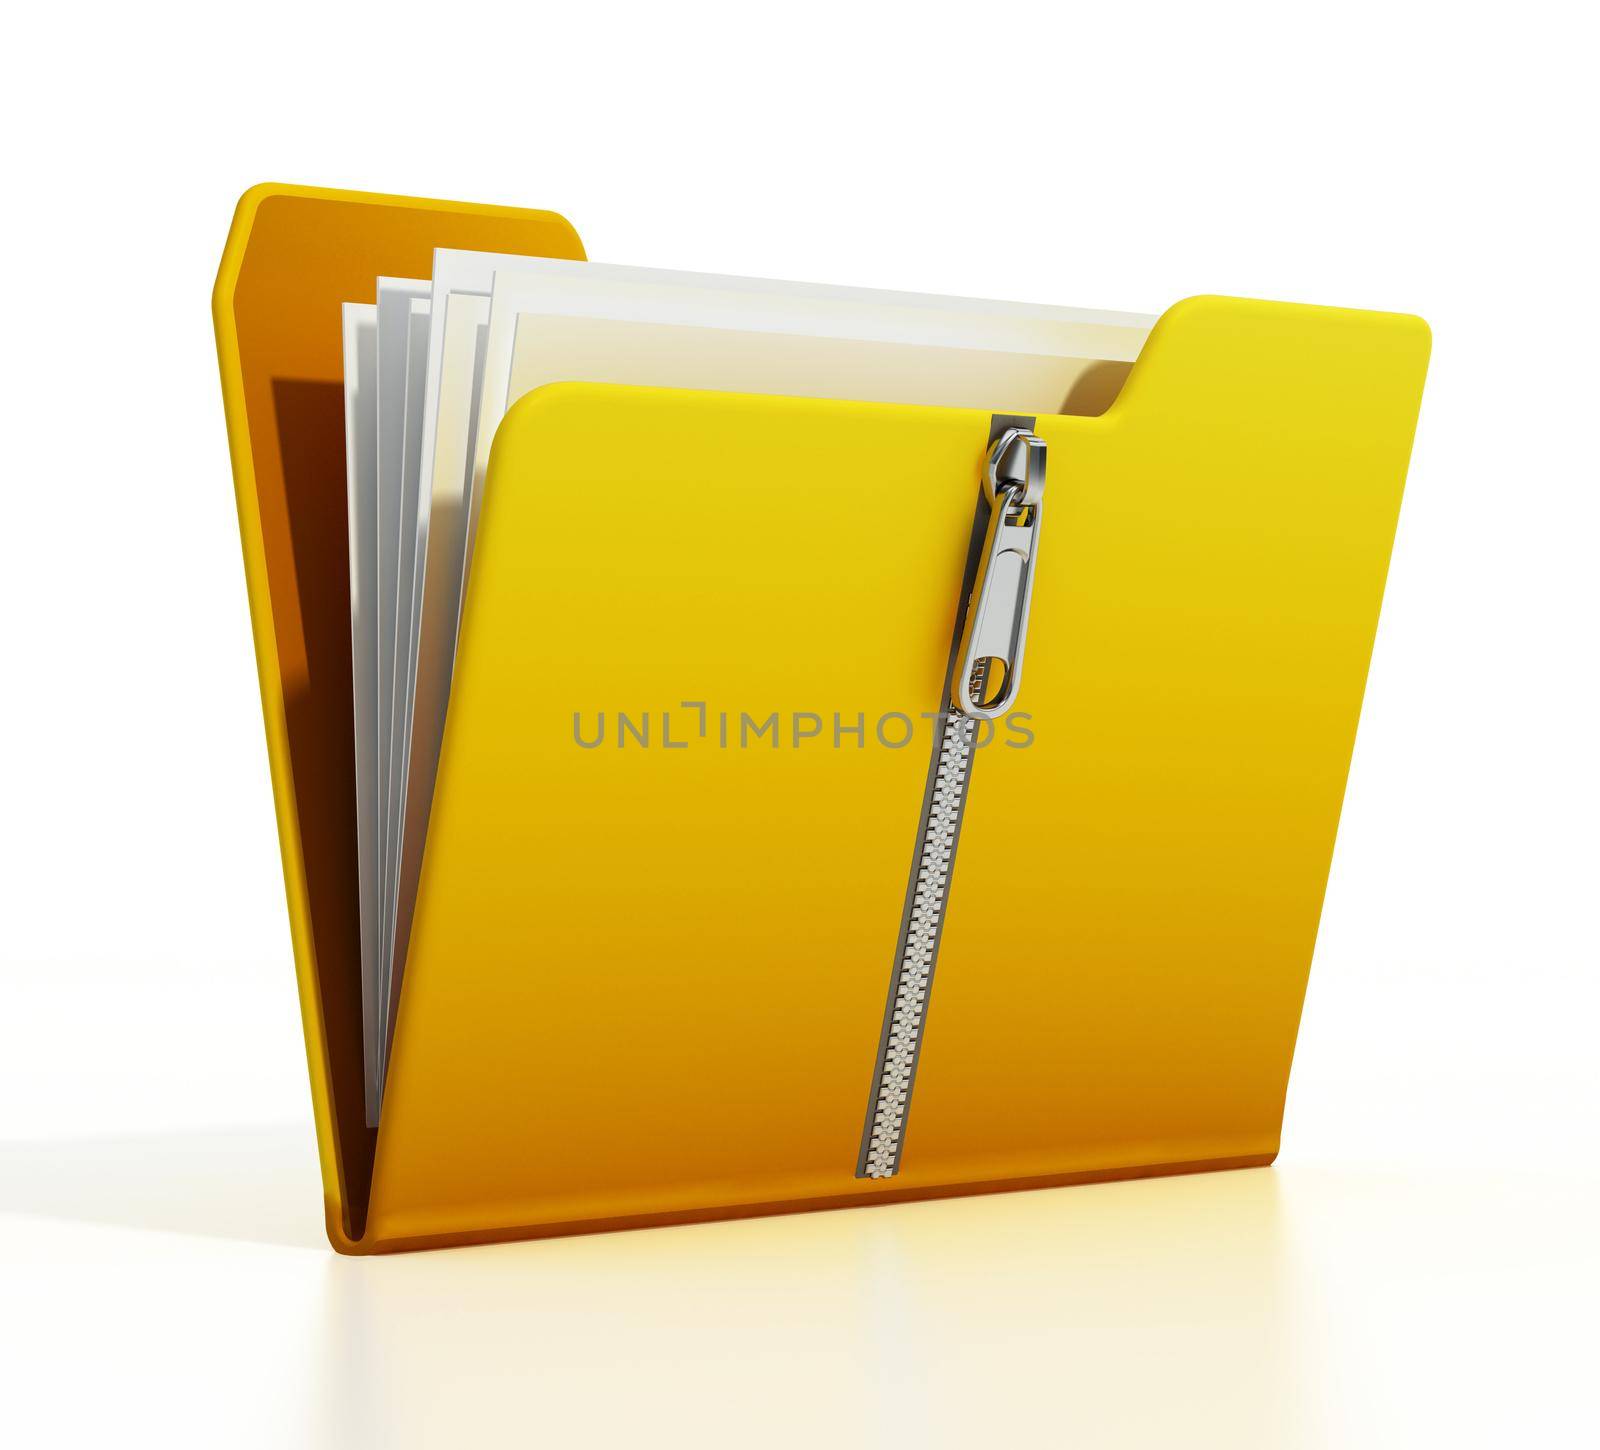 Compressed folder icon isolated on white background. 3D illustration.